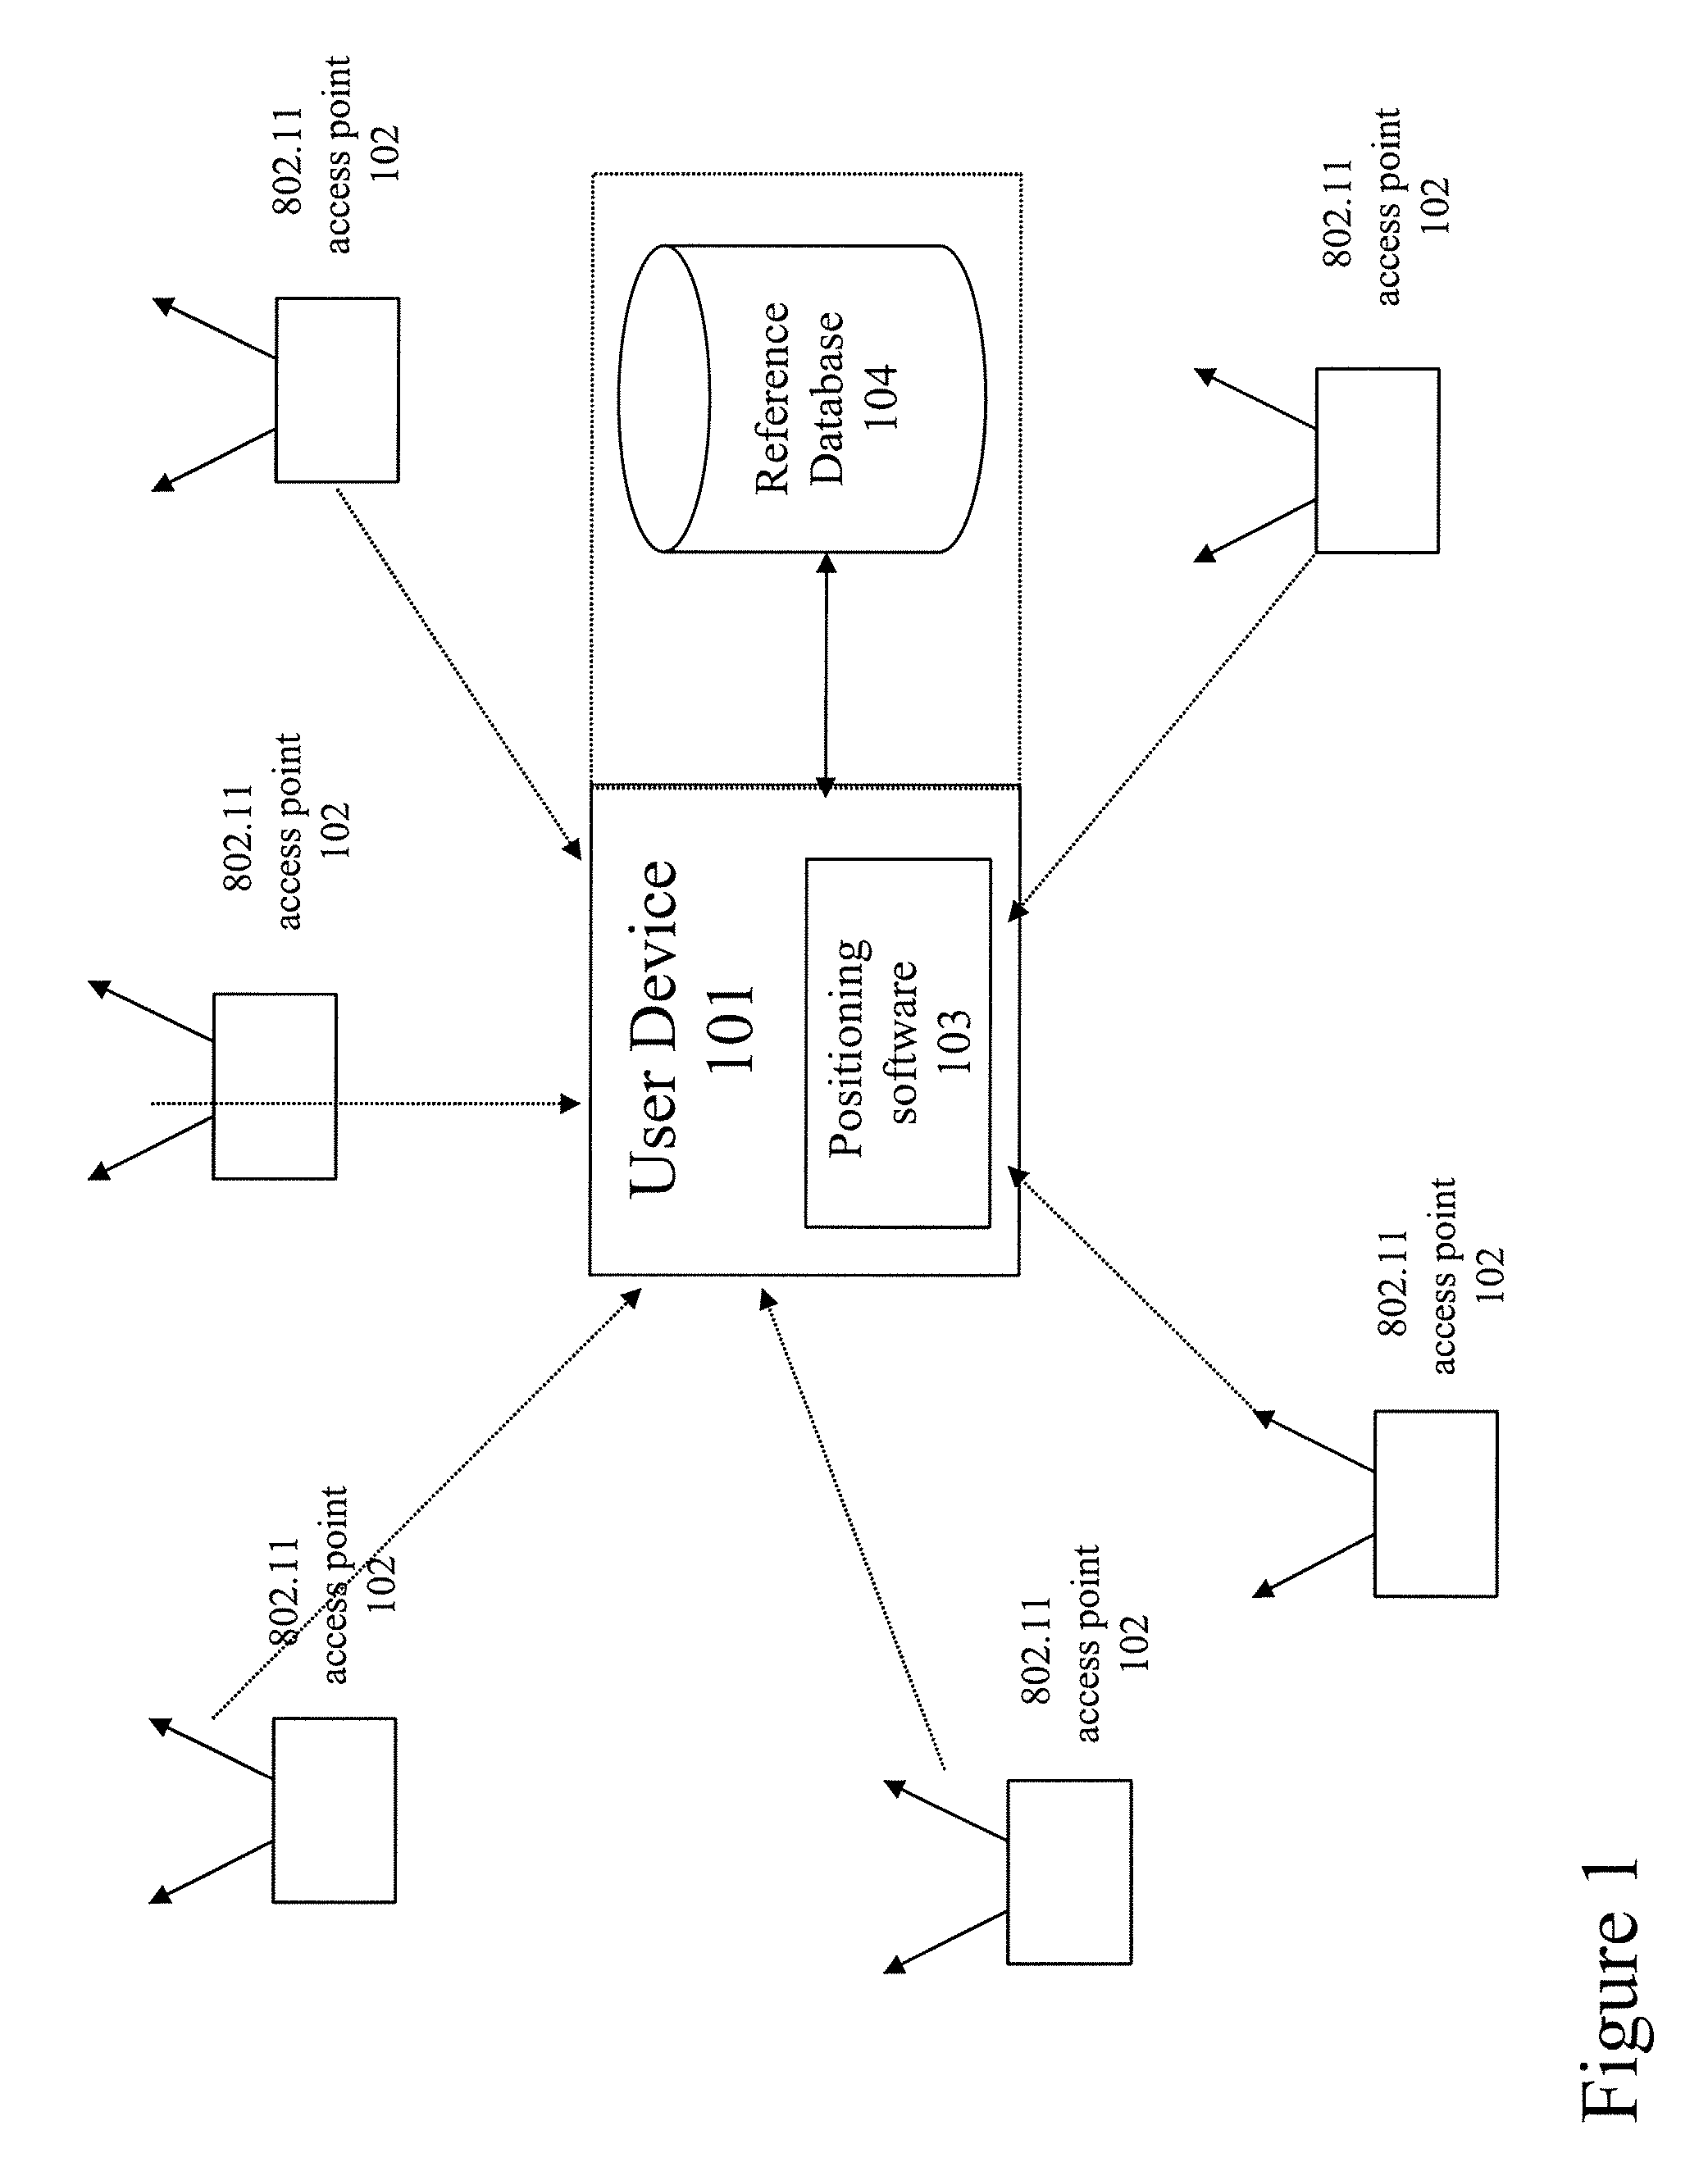 Method and system for selecting and providing a relevant subset of Wi-Fi location information to a mobile client device so the client device may estimate its position with efficient utilization of resources